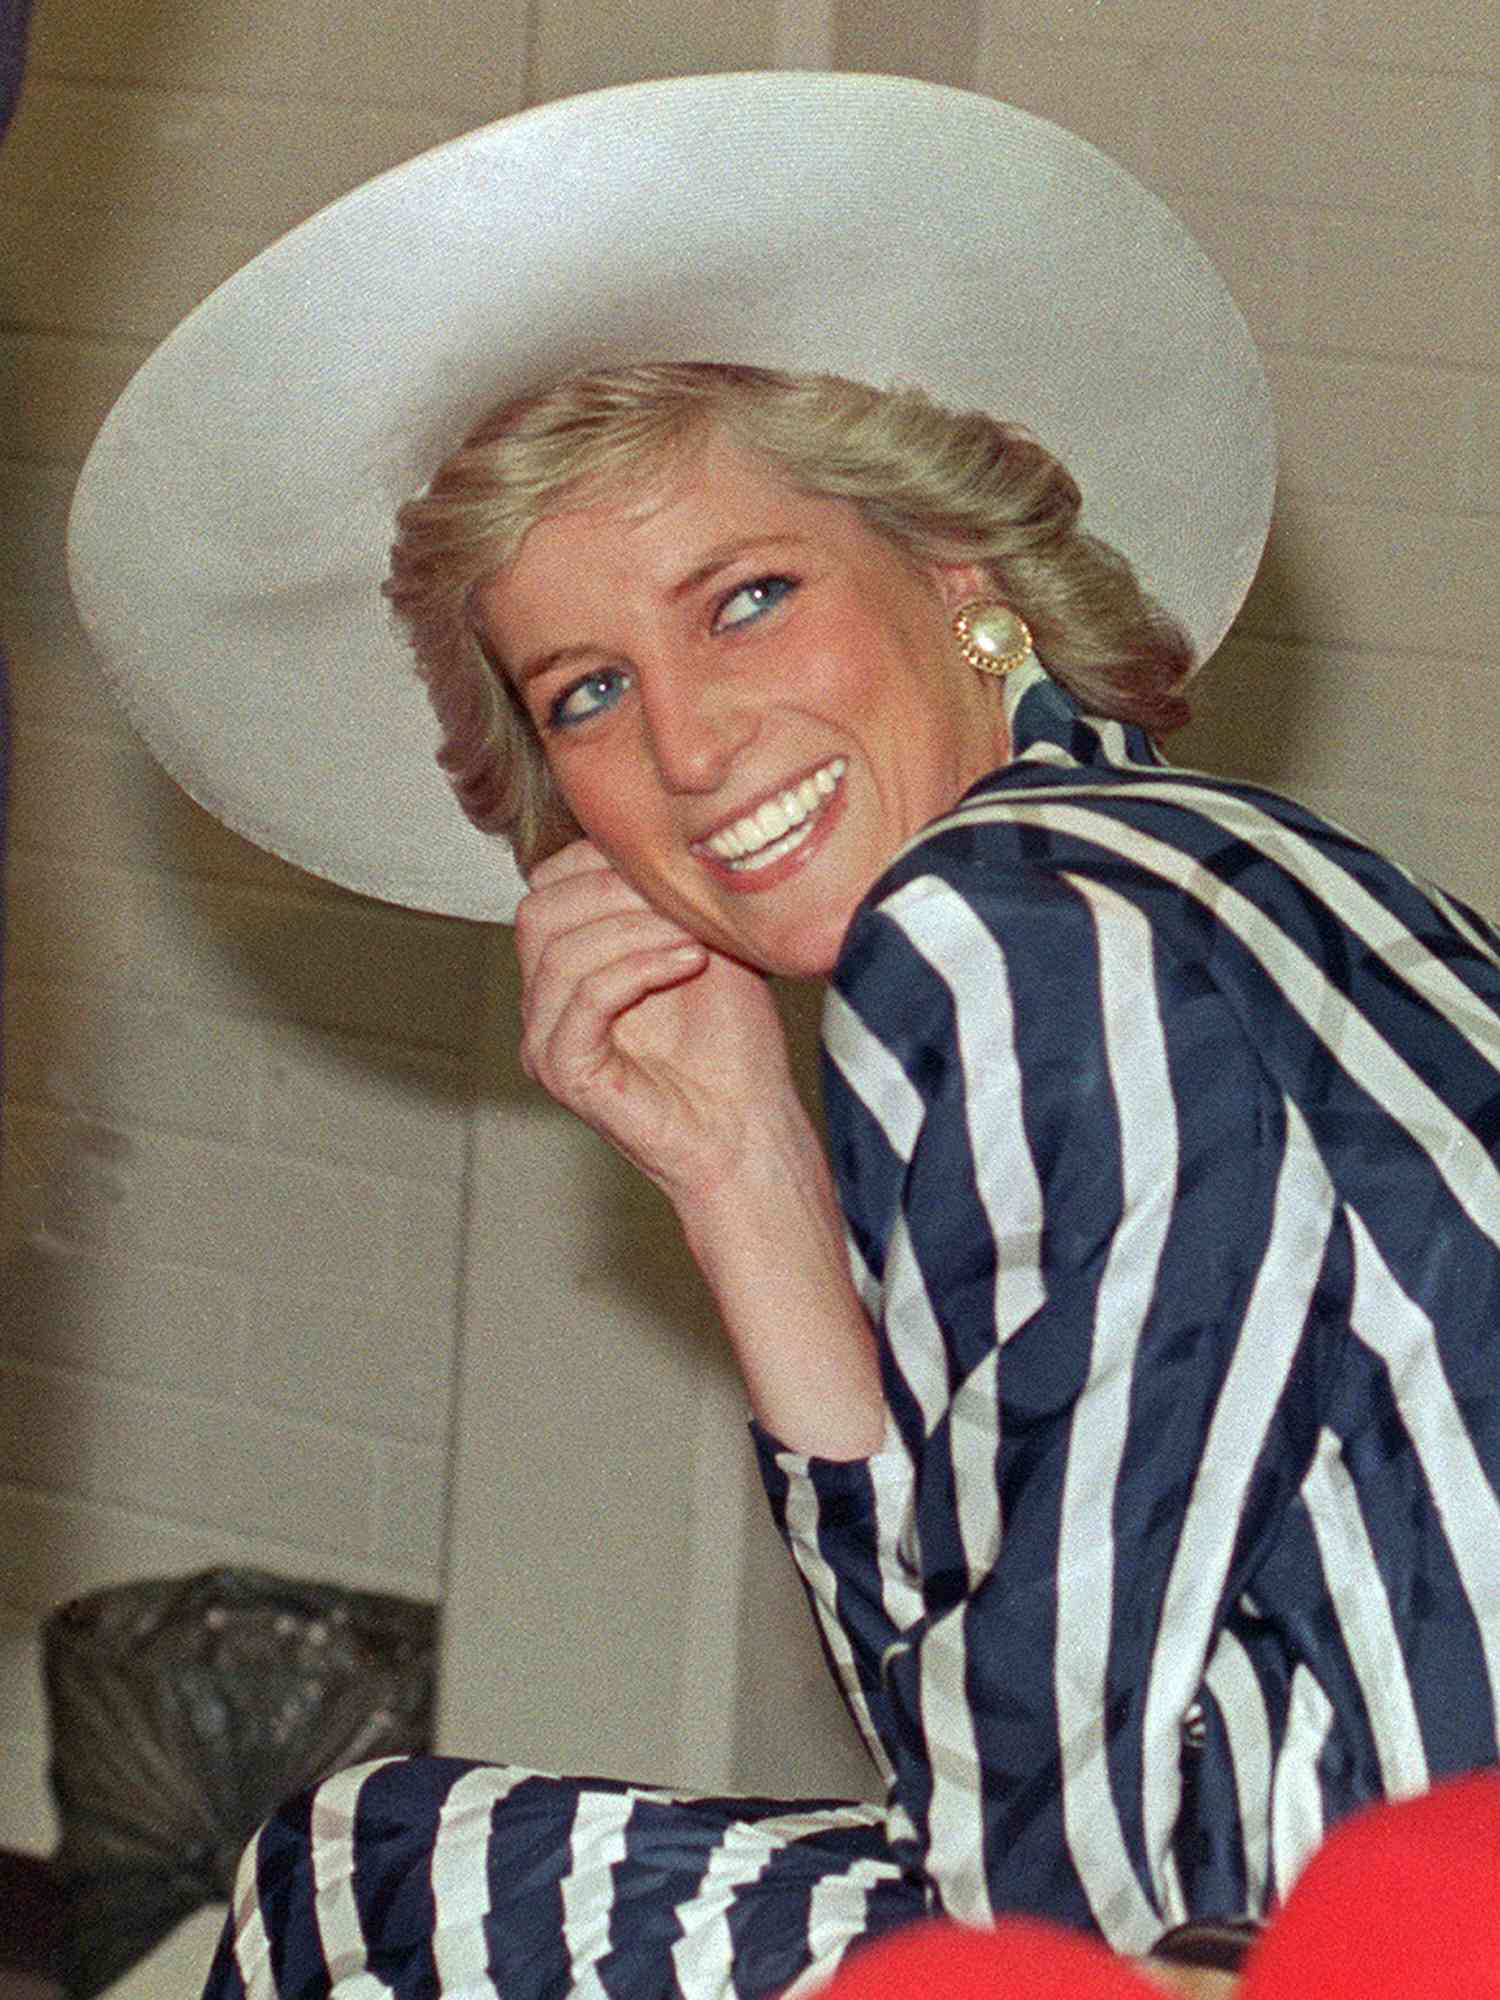 Princess Diana wears a feathered haircut, wide-brimmed white hat, and blue and white striped dress